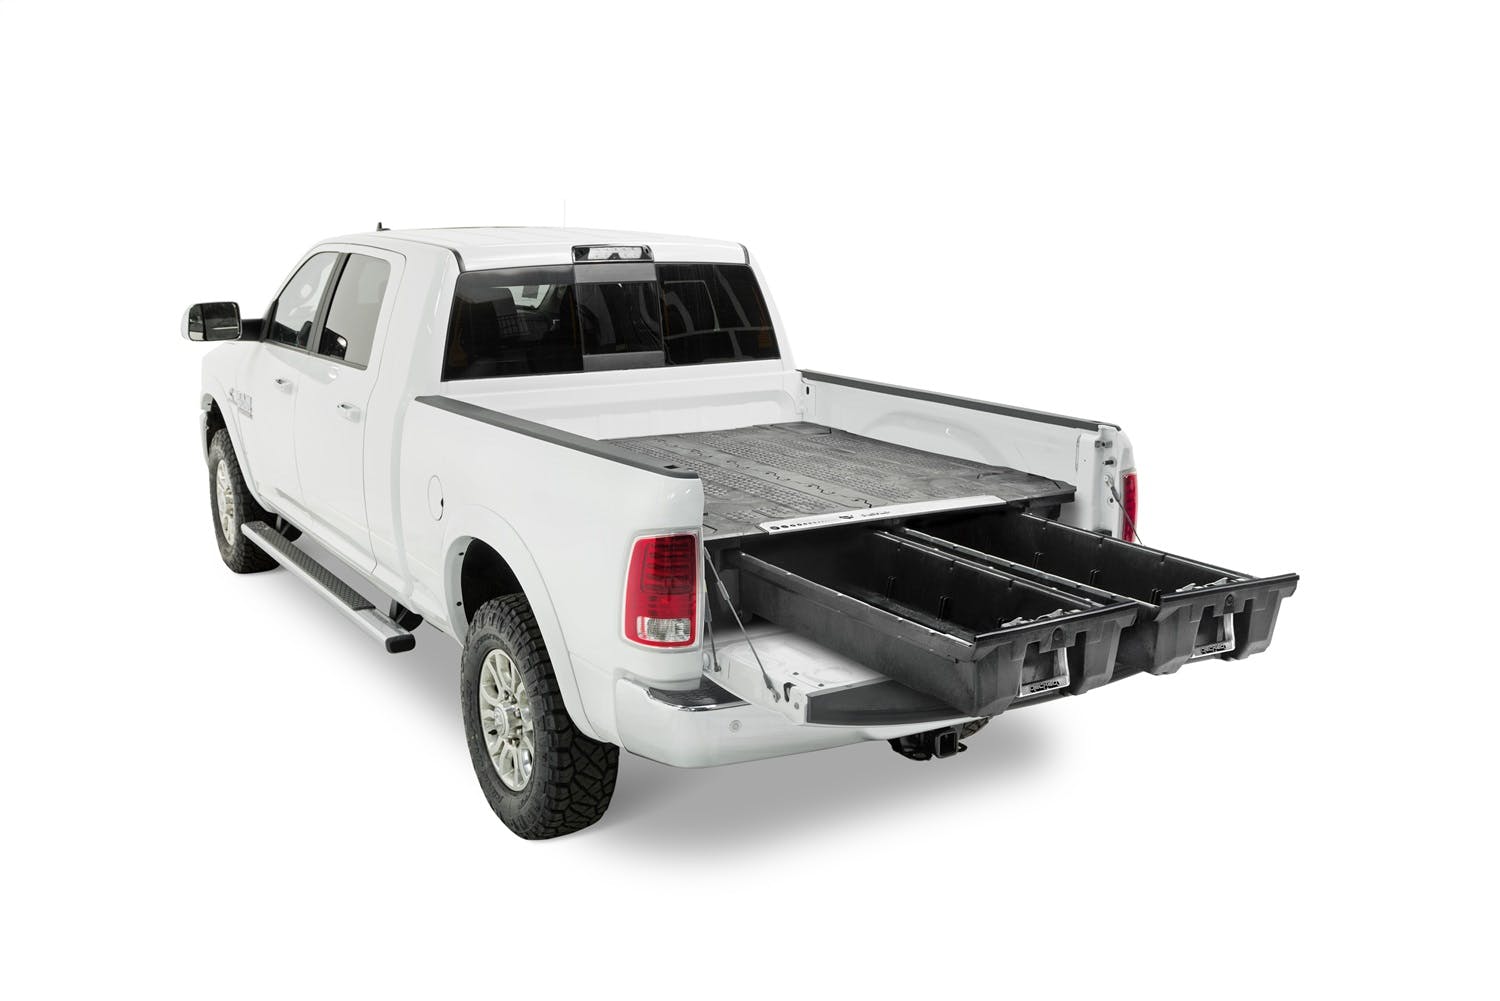 DECKED DR5 75.25 Two Drawer Storage System for A Full Size Pick Up Truck